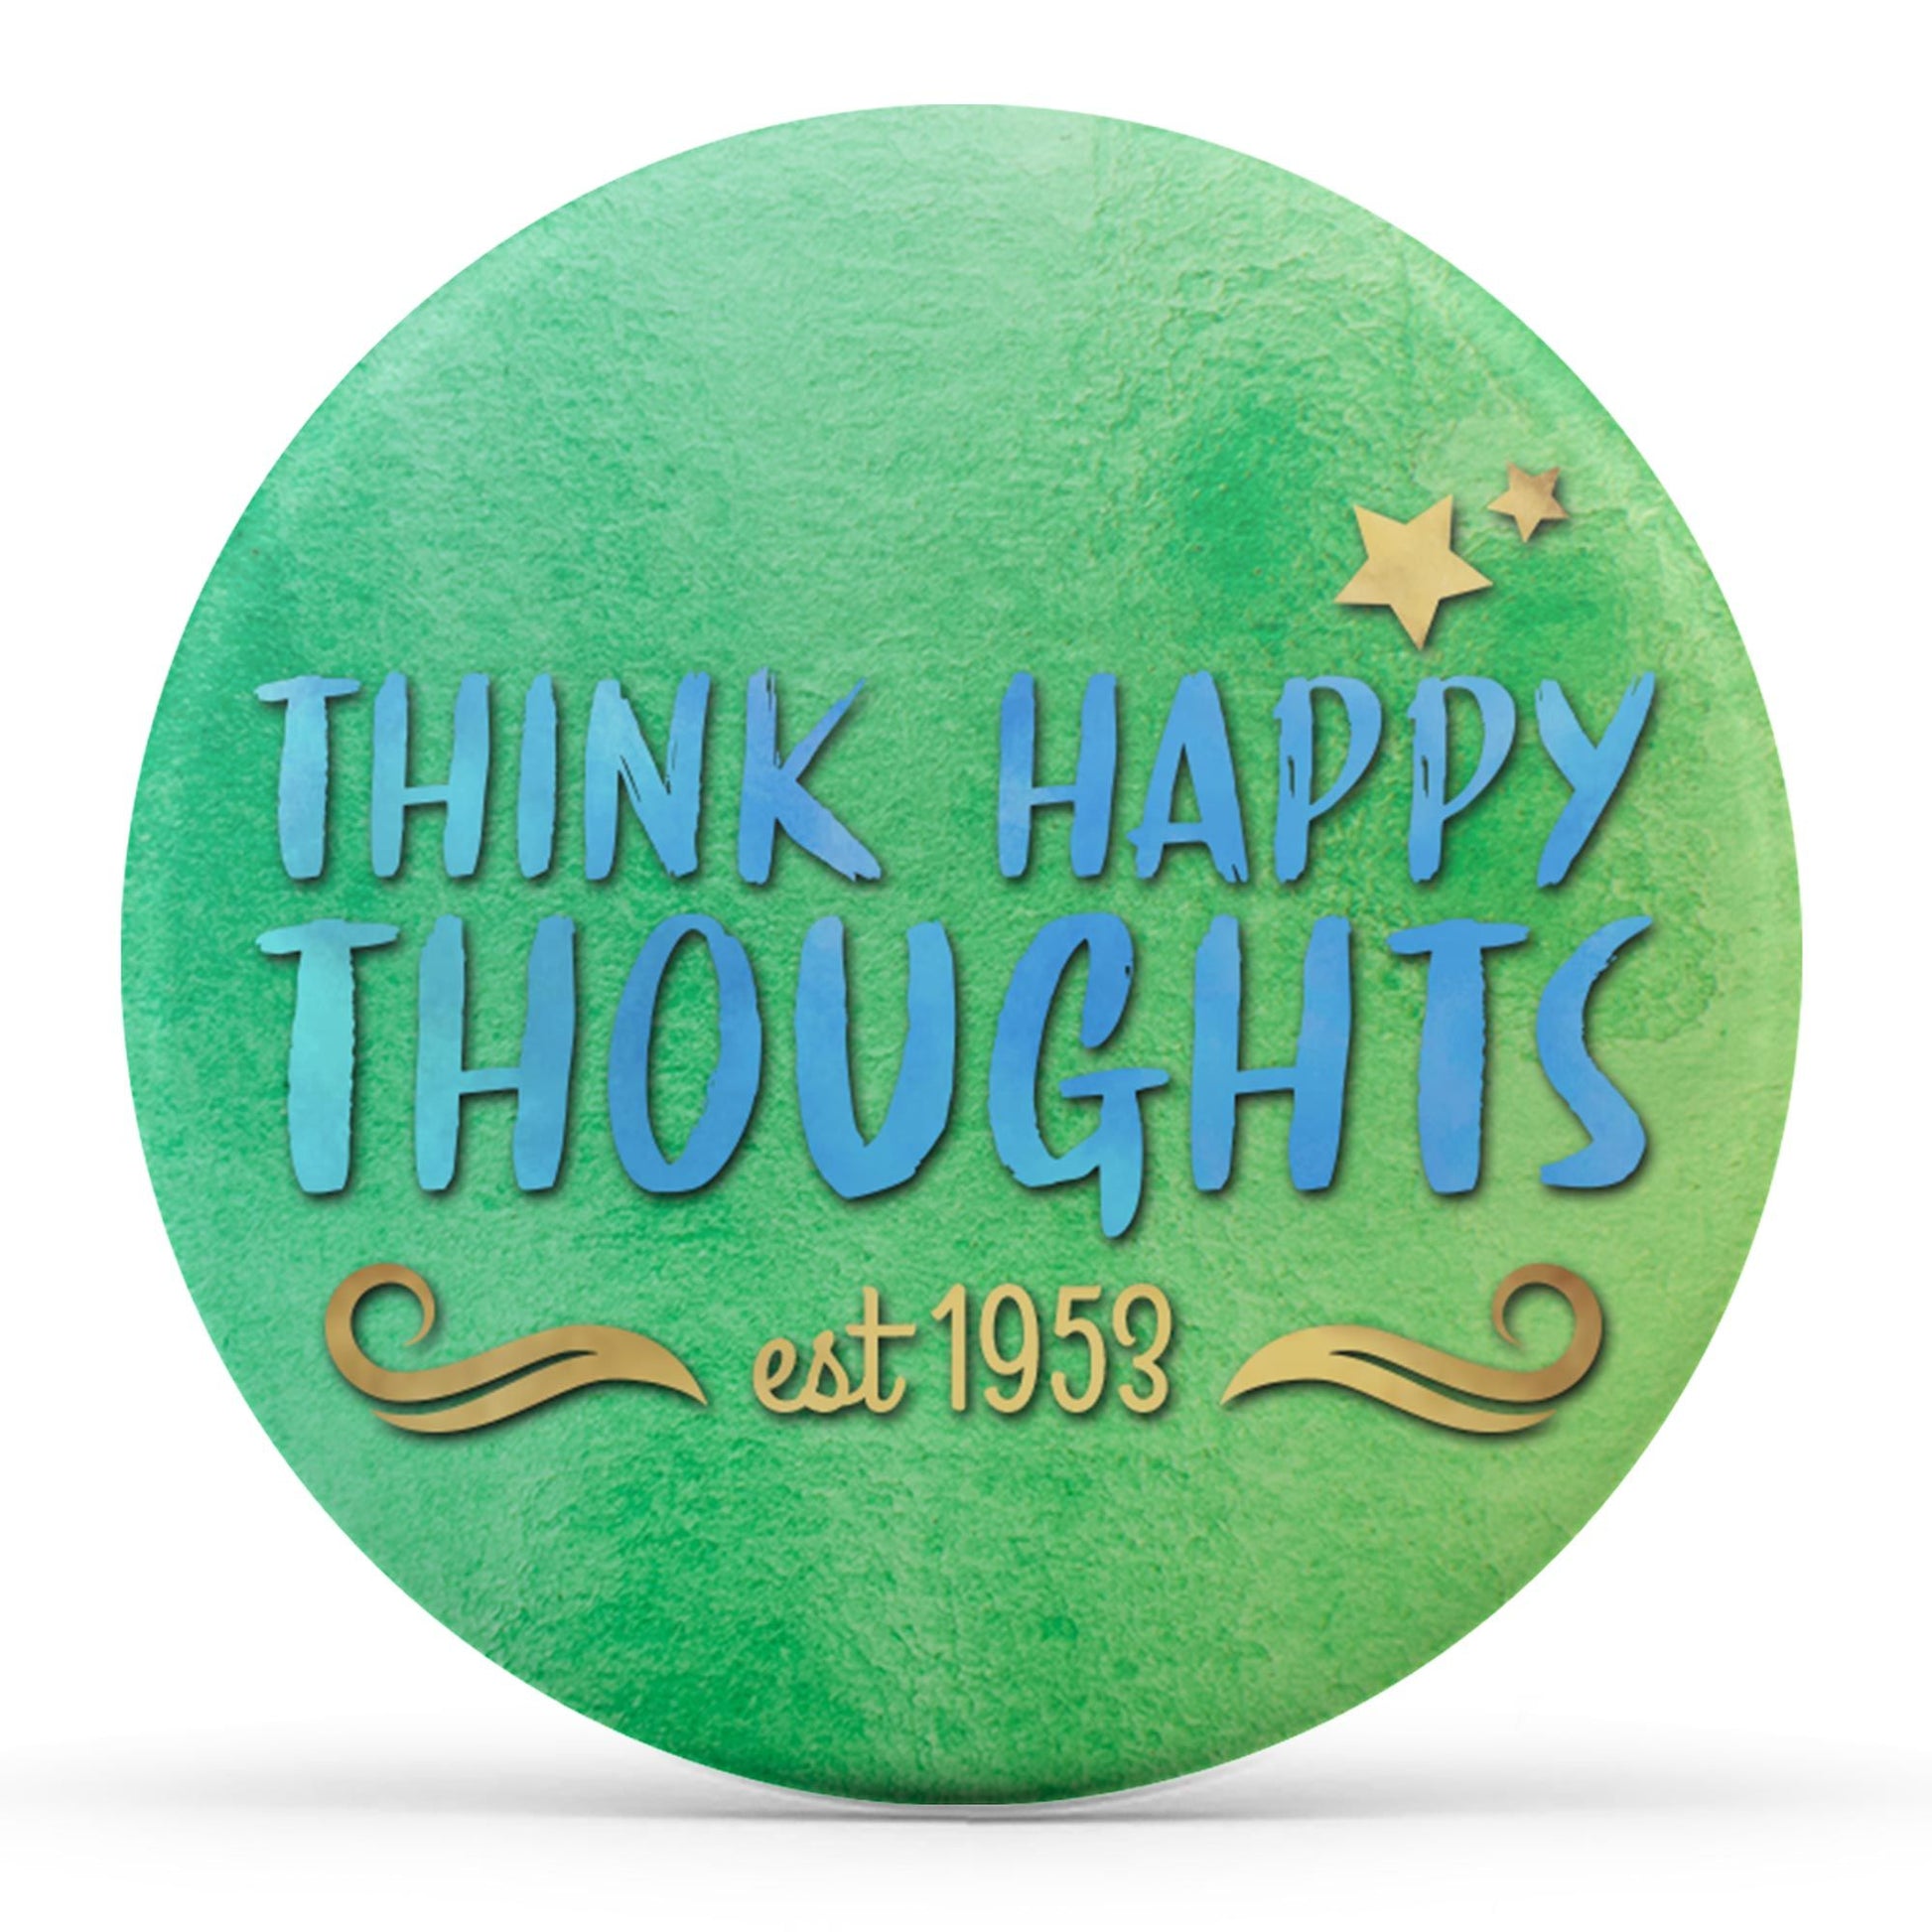 Think Happy Thoughts Image